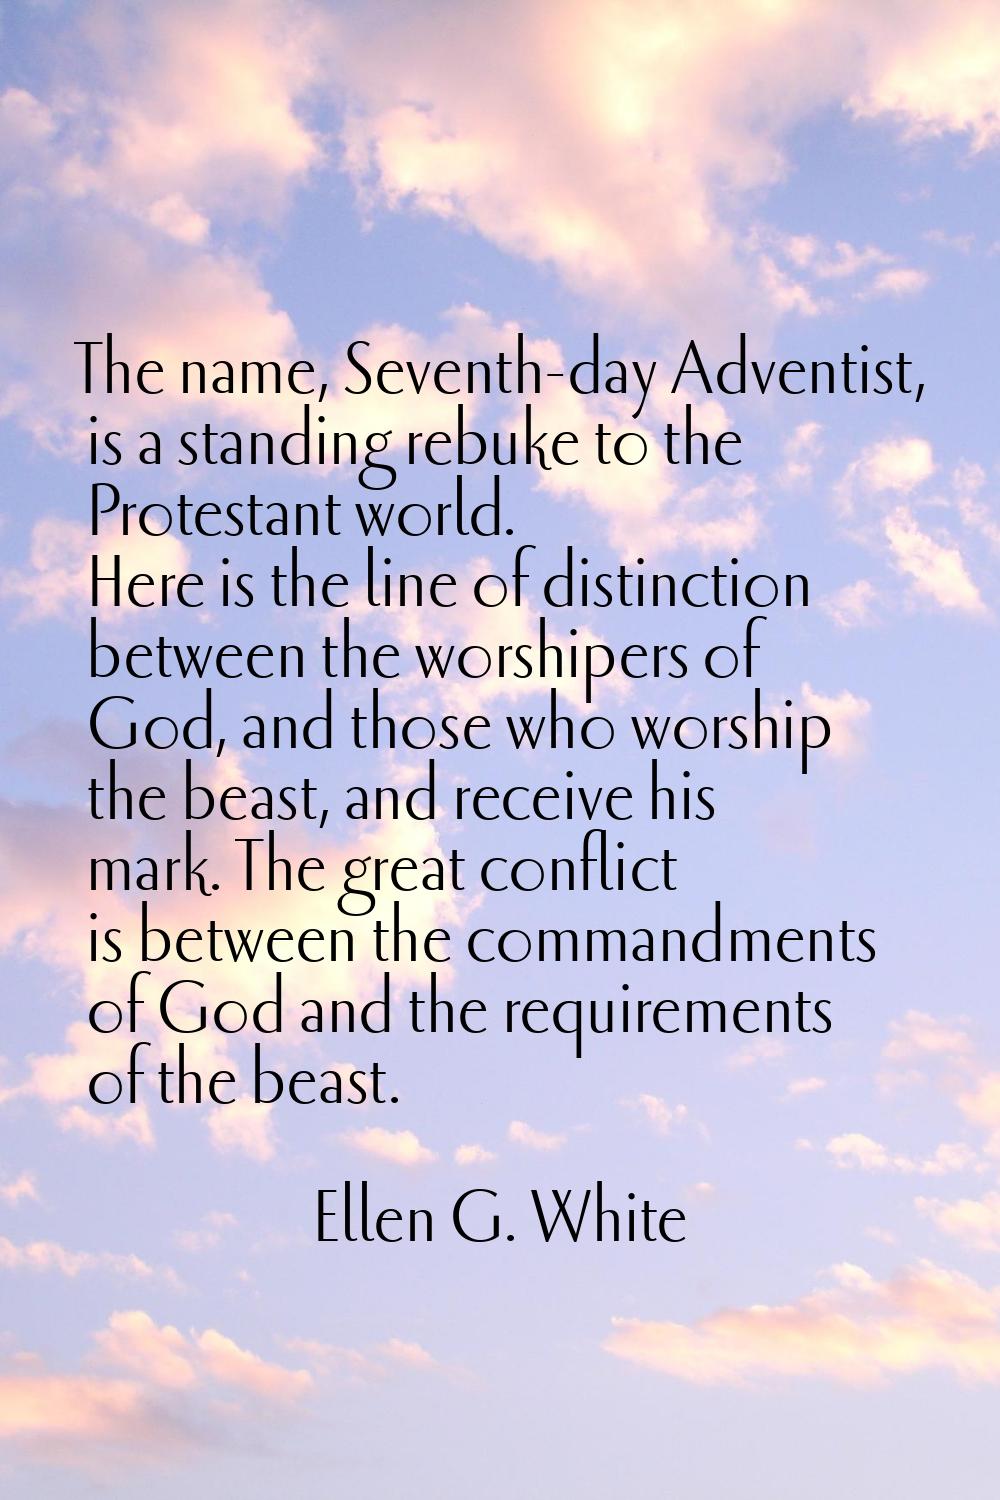 The name, Seventh-day Adventist, is a standing rebuke to the Protestant world. Here is the line of 